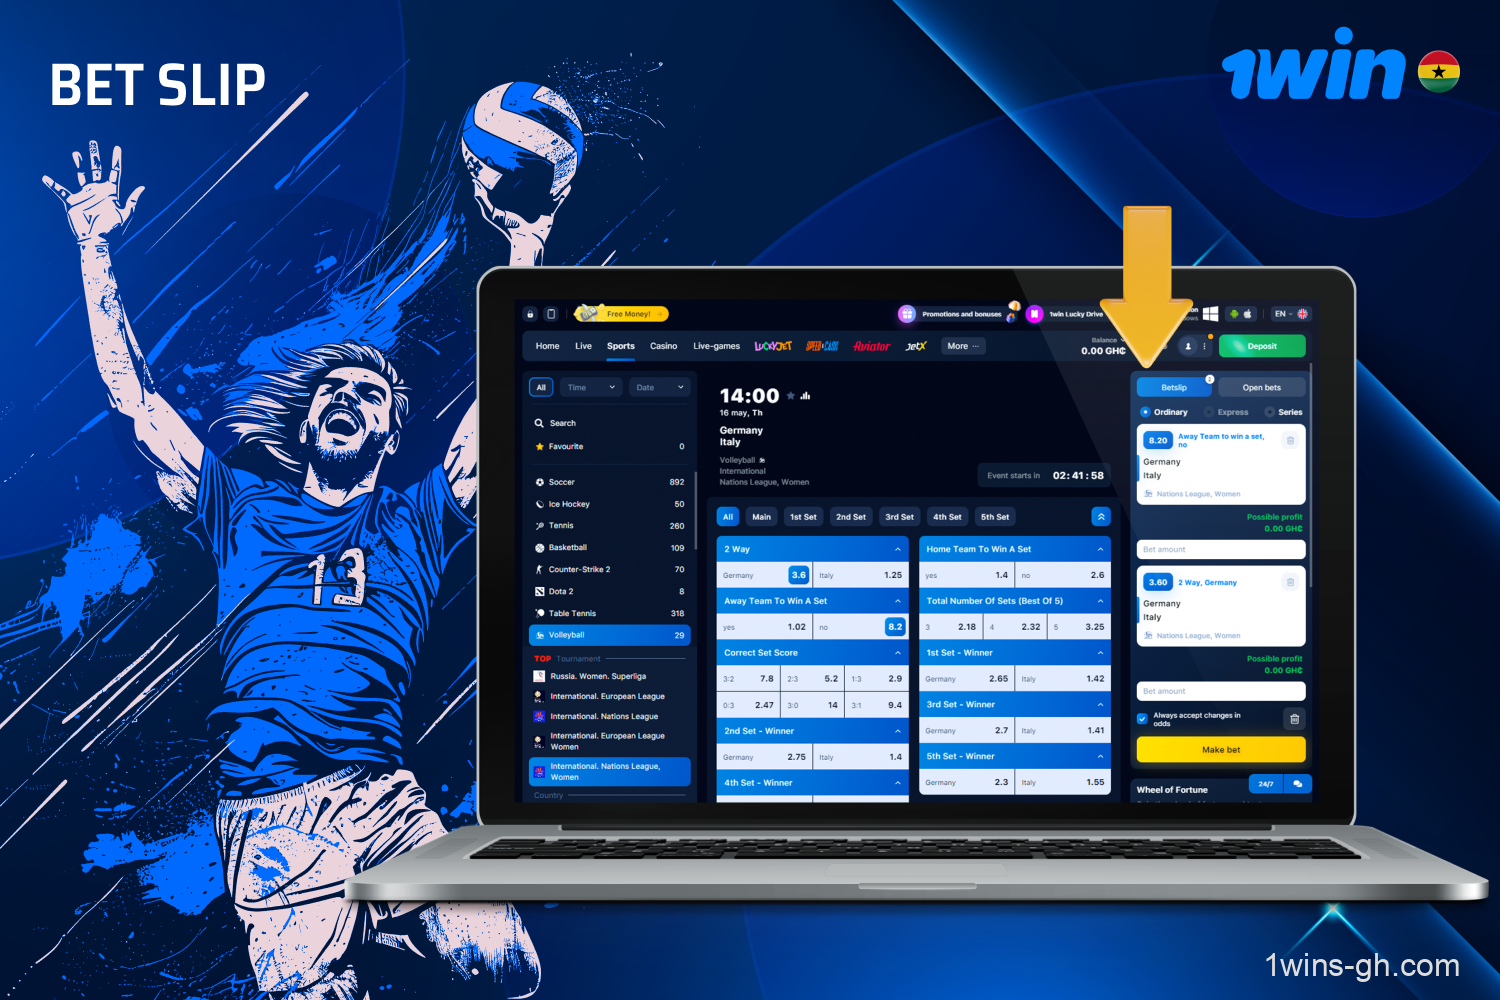 Placing bets at 1win is done via the bet slip, where Ghanaian players can access information about the match, odds and potential winnings